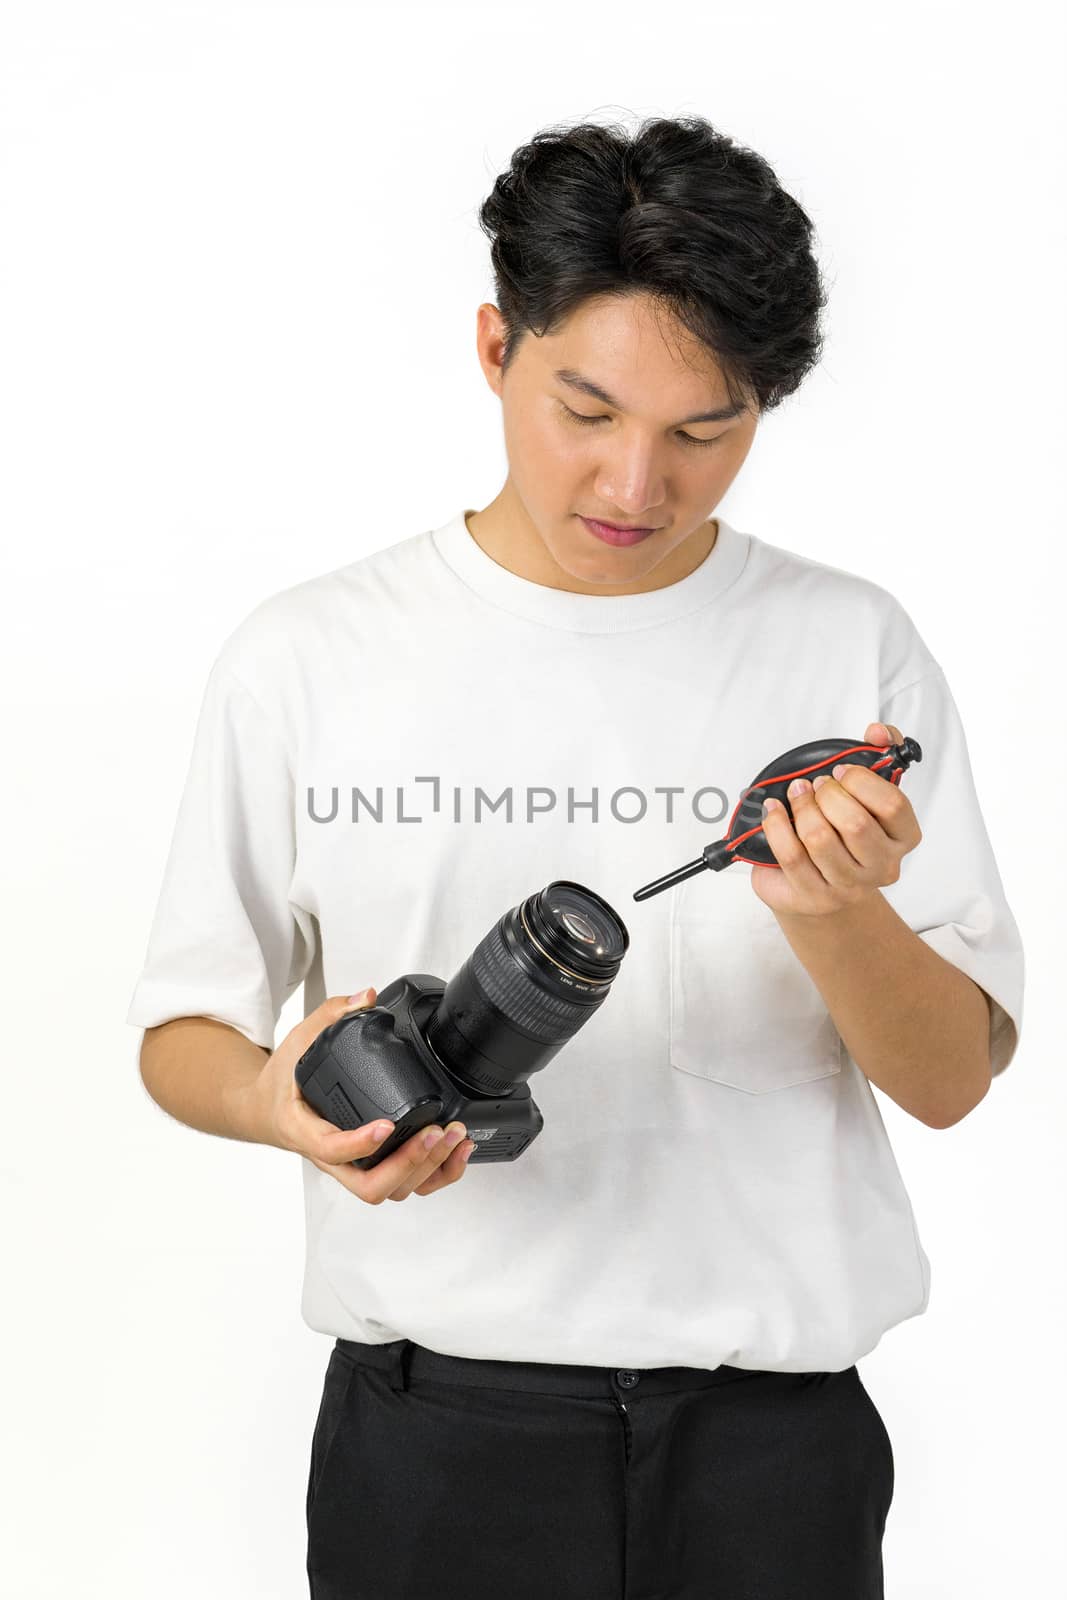 An Asian photographer is cleaning the camera and lens with a air blower camera cleaning for shooting fashion models in the studio.